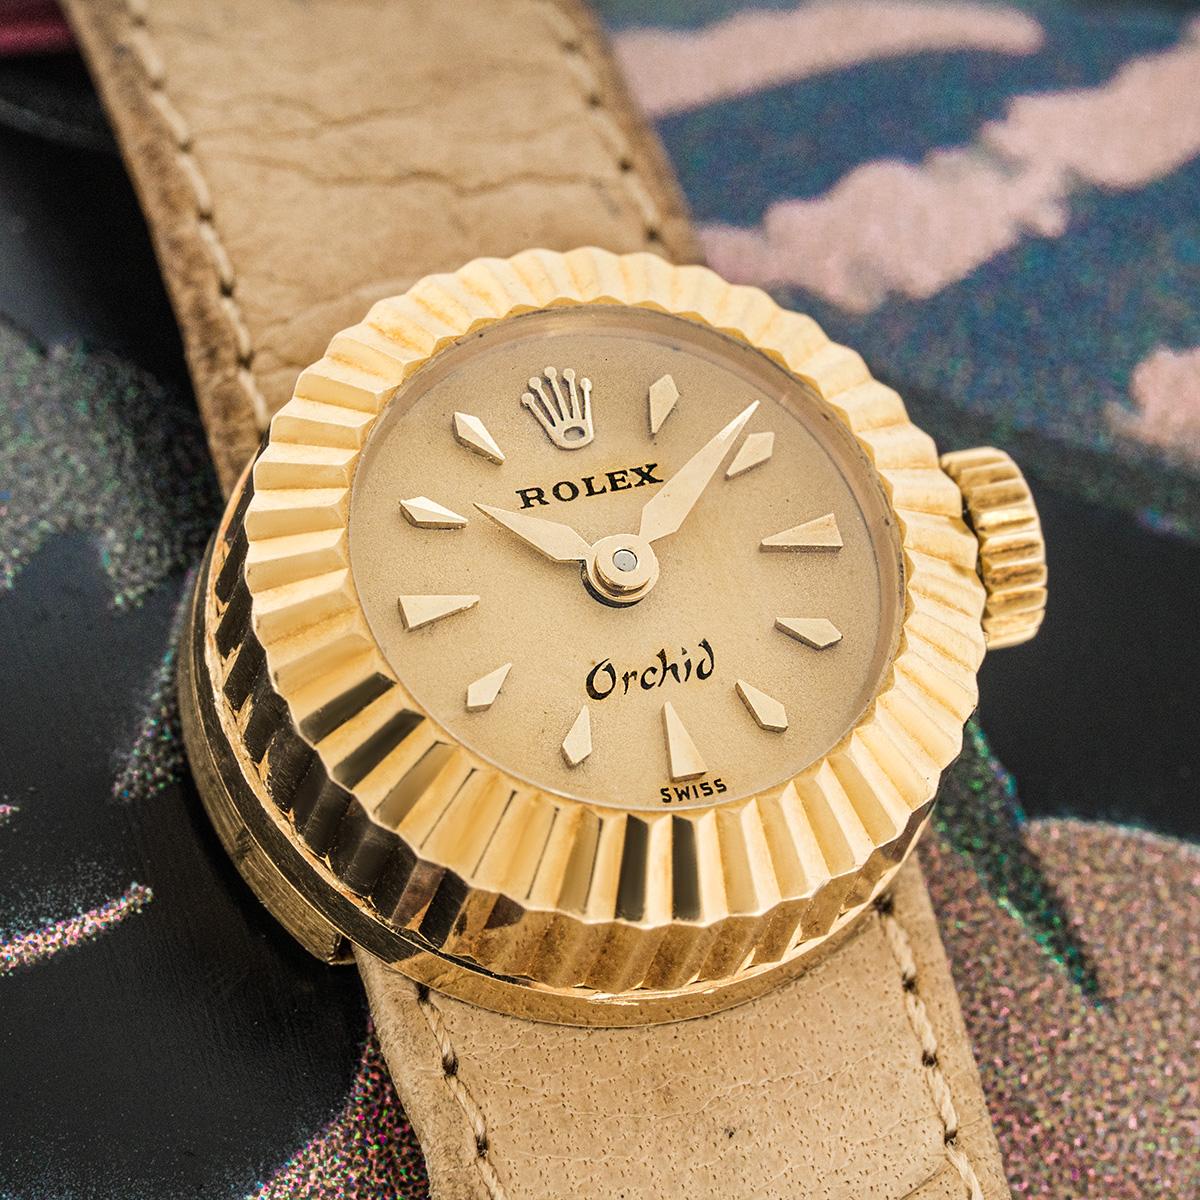 A vintage ladies Orchid Chameleon wristwatch in yellow gold by Rolex. Features a champagne dial with applied hour markers and a yellow gold fluted bezel.

Fitted with a plastic glass, a manual winding movement and an original brown leather strap